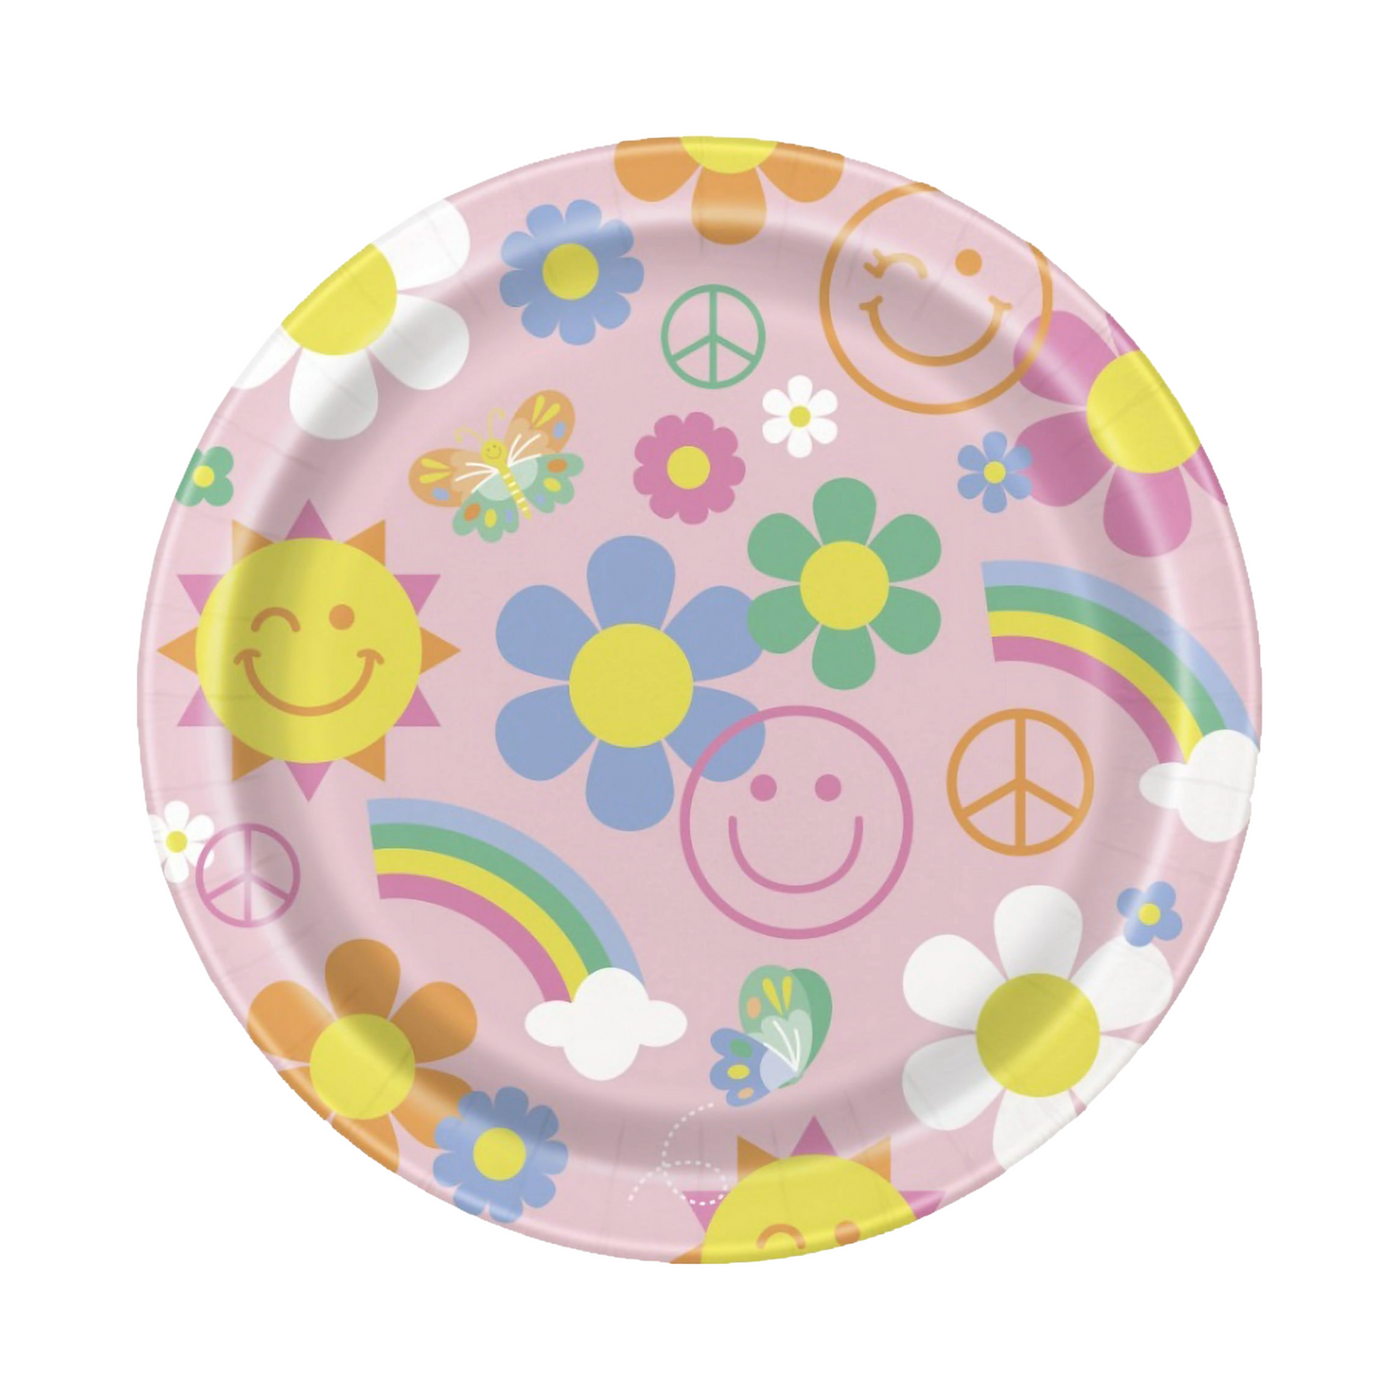 Groovy Birthday Party Dinner Plates, Pack of 8 - Amazing Pinatas 